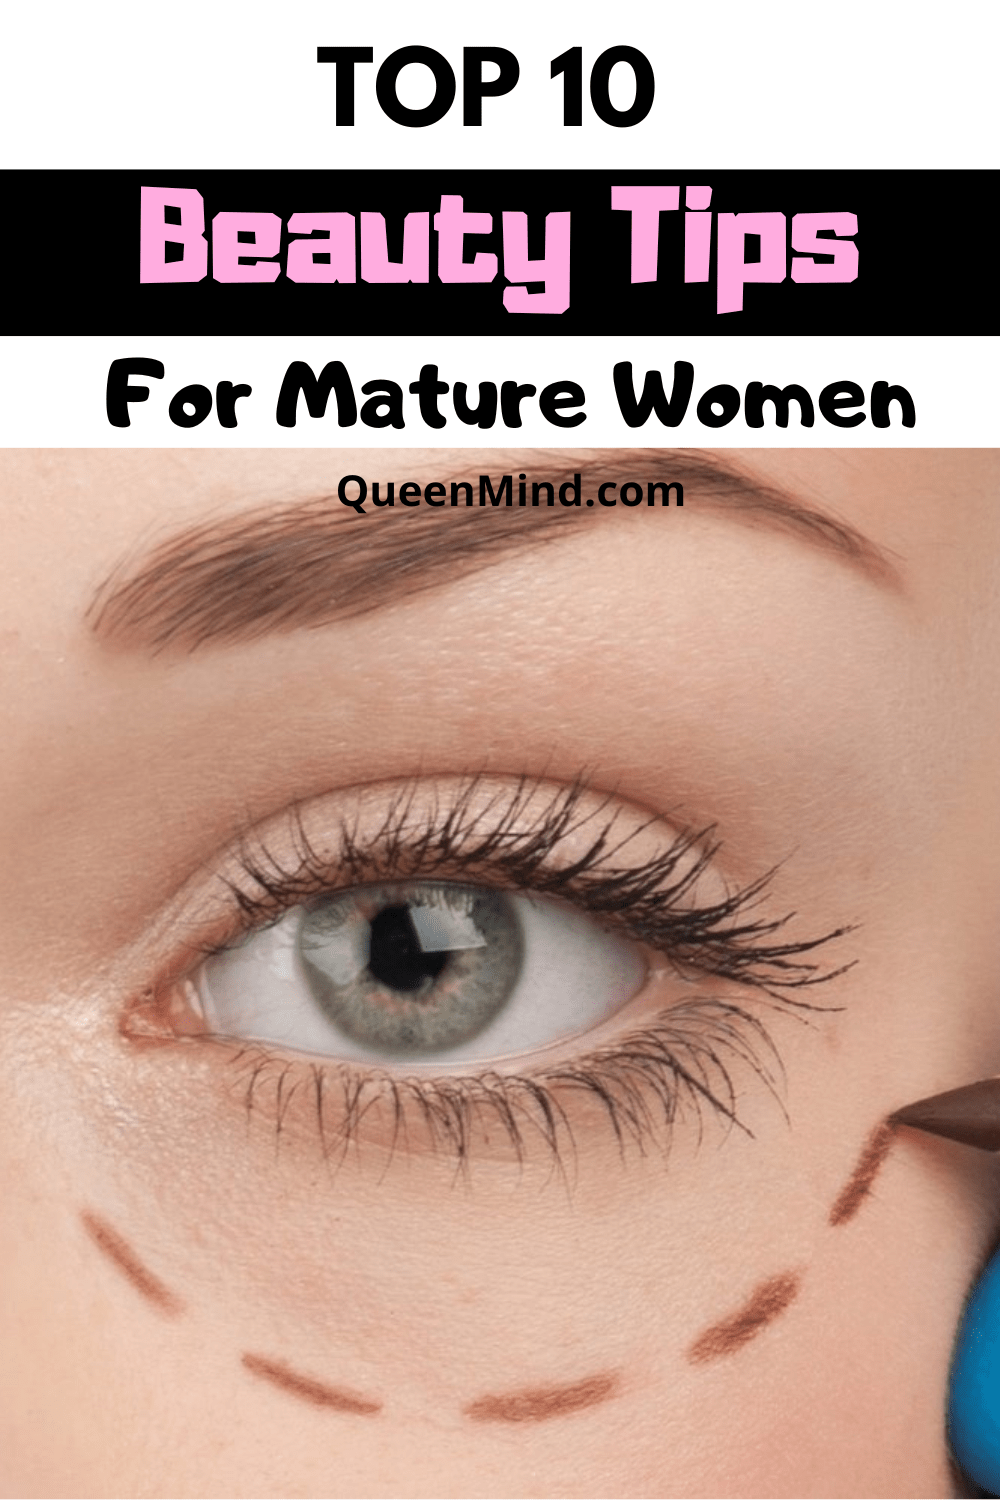 10 Makeup and Beauty Tips For Older Women